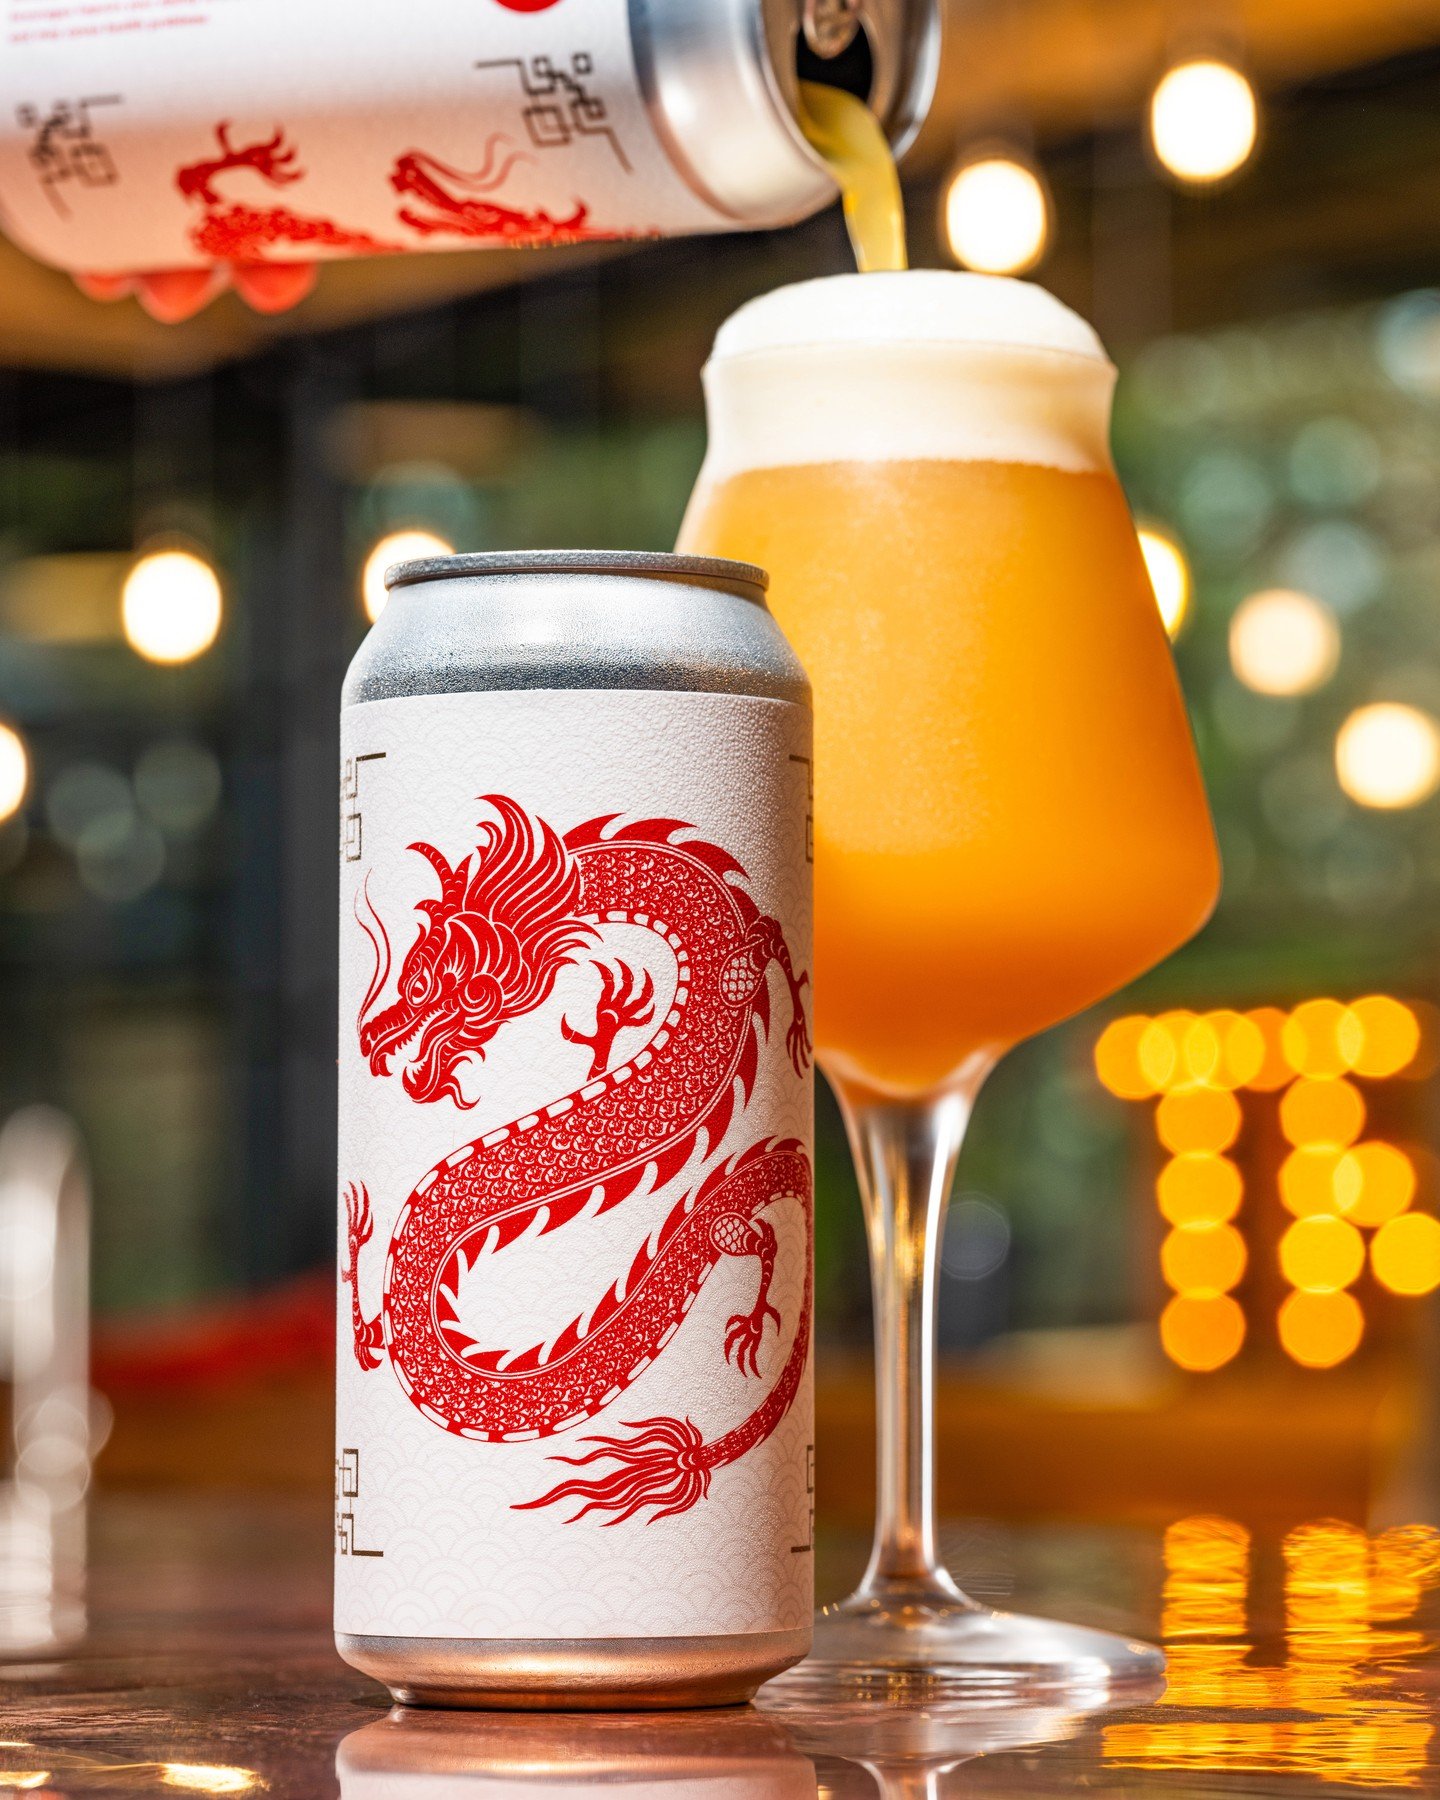 We loved Year of the Dragon so much we had to take another crack at it.

You can purchase this gem at any Massachusetts Tree House location today. 

🐉🀄️🐉

#productphotography #productphotodaily #photography #craftbeer #treehousebrewing #beergram #